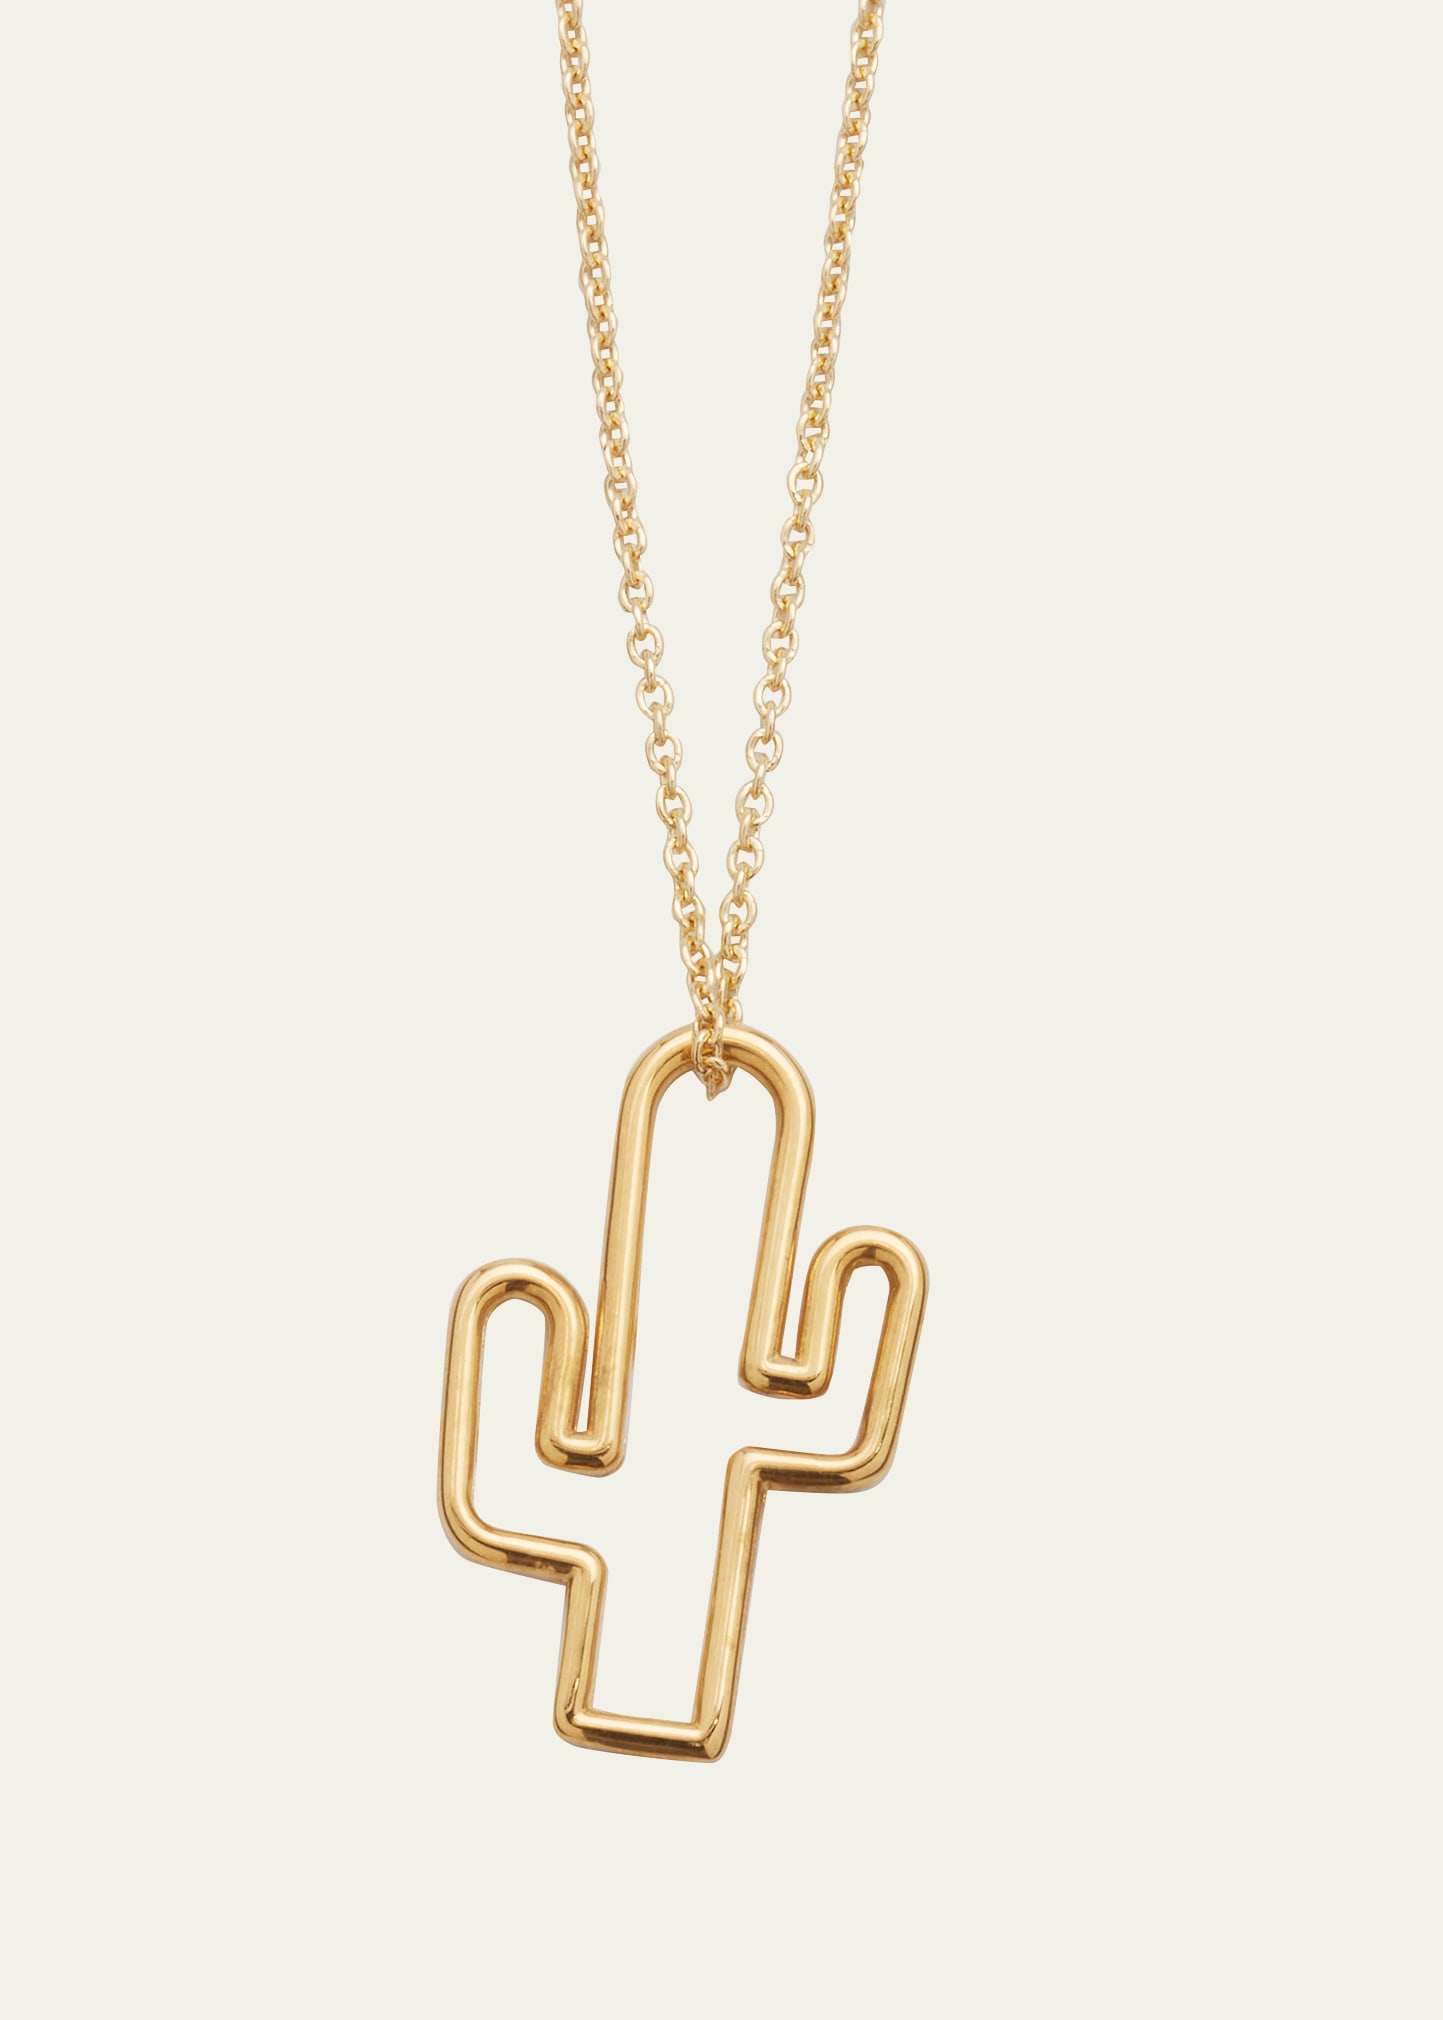 Cactus Necklace in 9K Gold